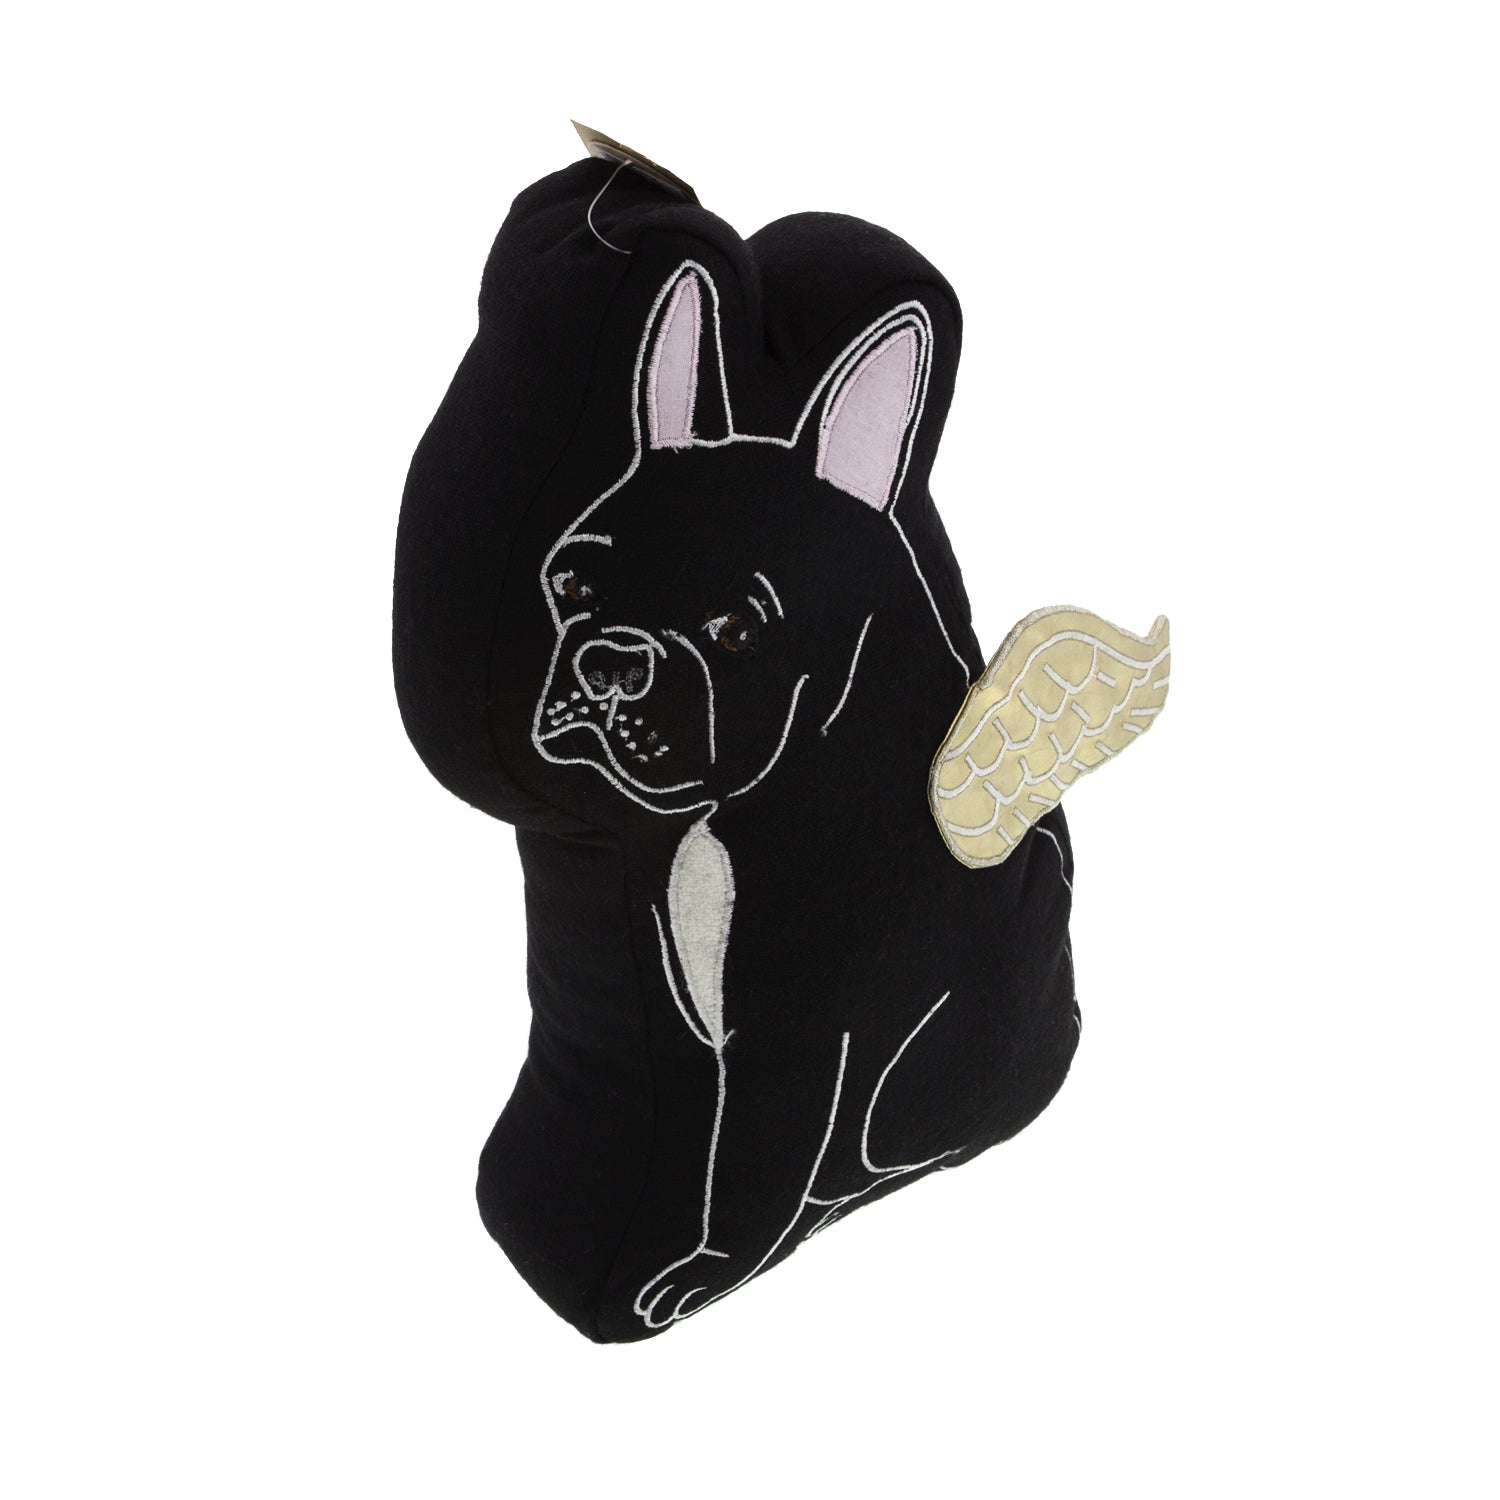 Dog Lover Gifts available at Dog Krazy Gifts  – Black French Bulldog Cushion – Gorgeously detailed and handcrafted luxury cushions part of the French Bulldog Range available from Dog Krazy Gift